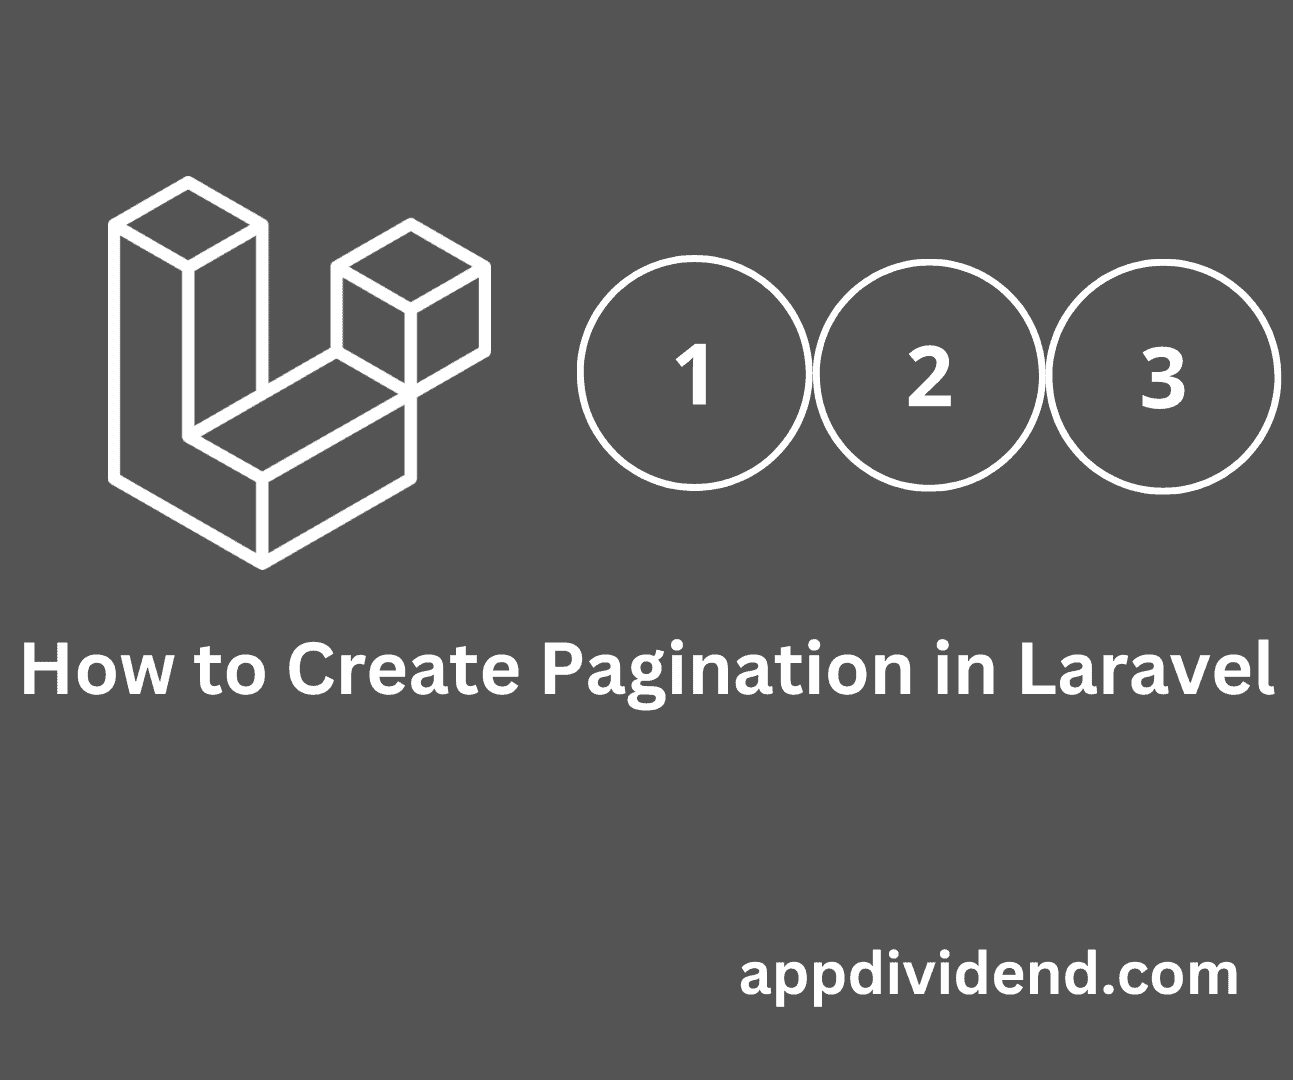 How to Create Pagination in Laravel